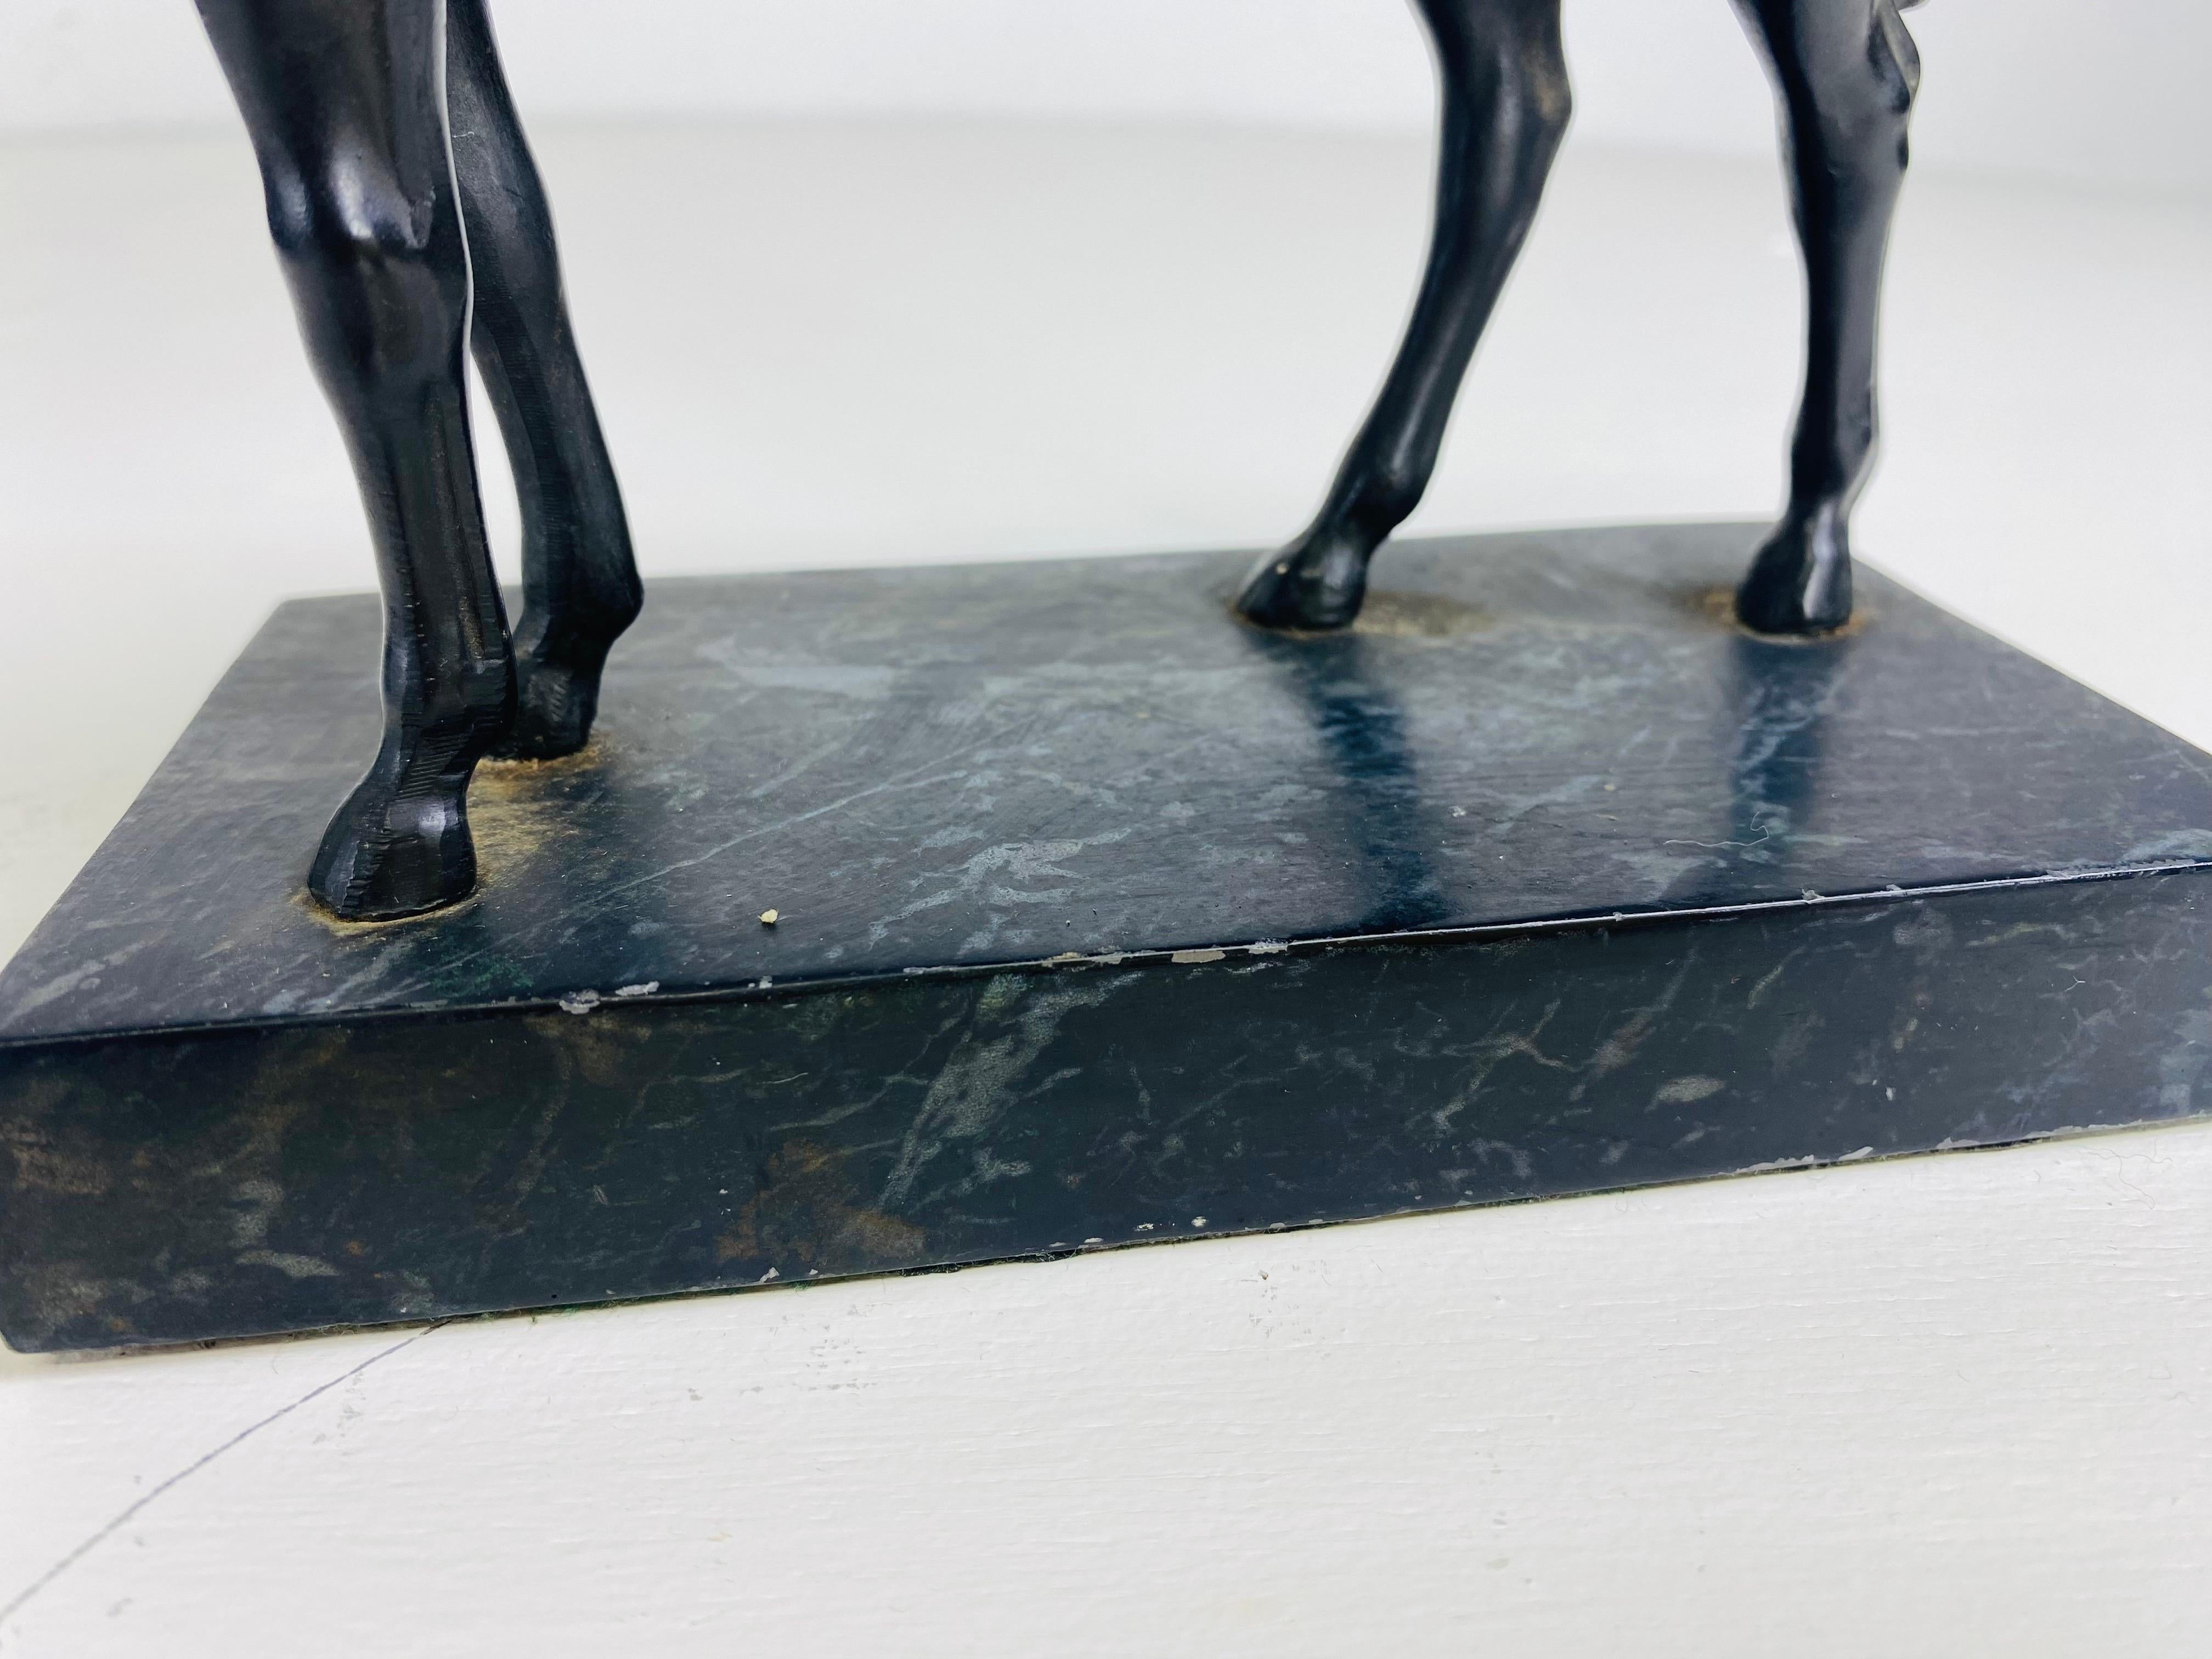 This is an early 20th century equestrian horse sculpture in bronze. This horse sculpture has a dark ebony bronze finish to the surface and stands on a bronze weighted base. The bronze is from American art deco period circa 1920.